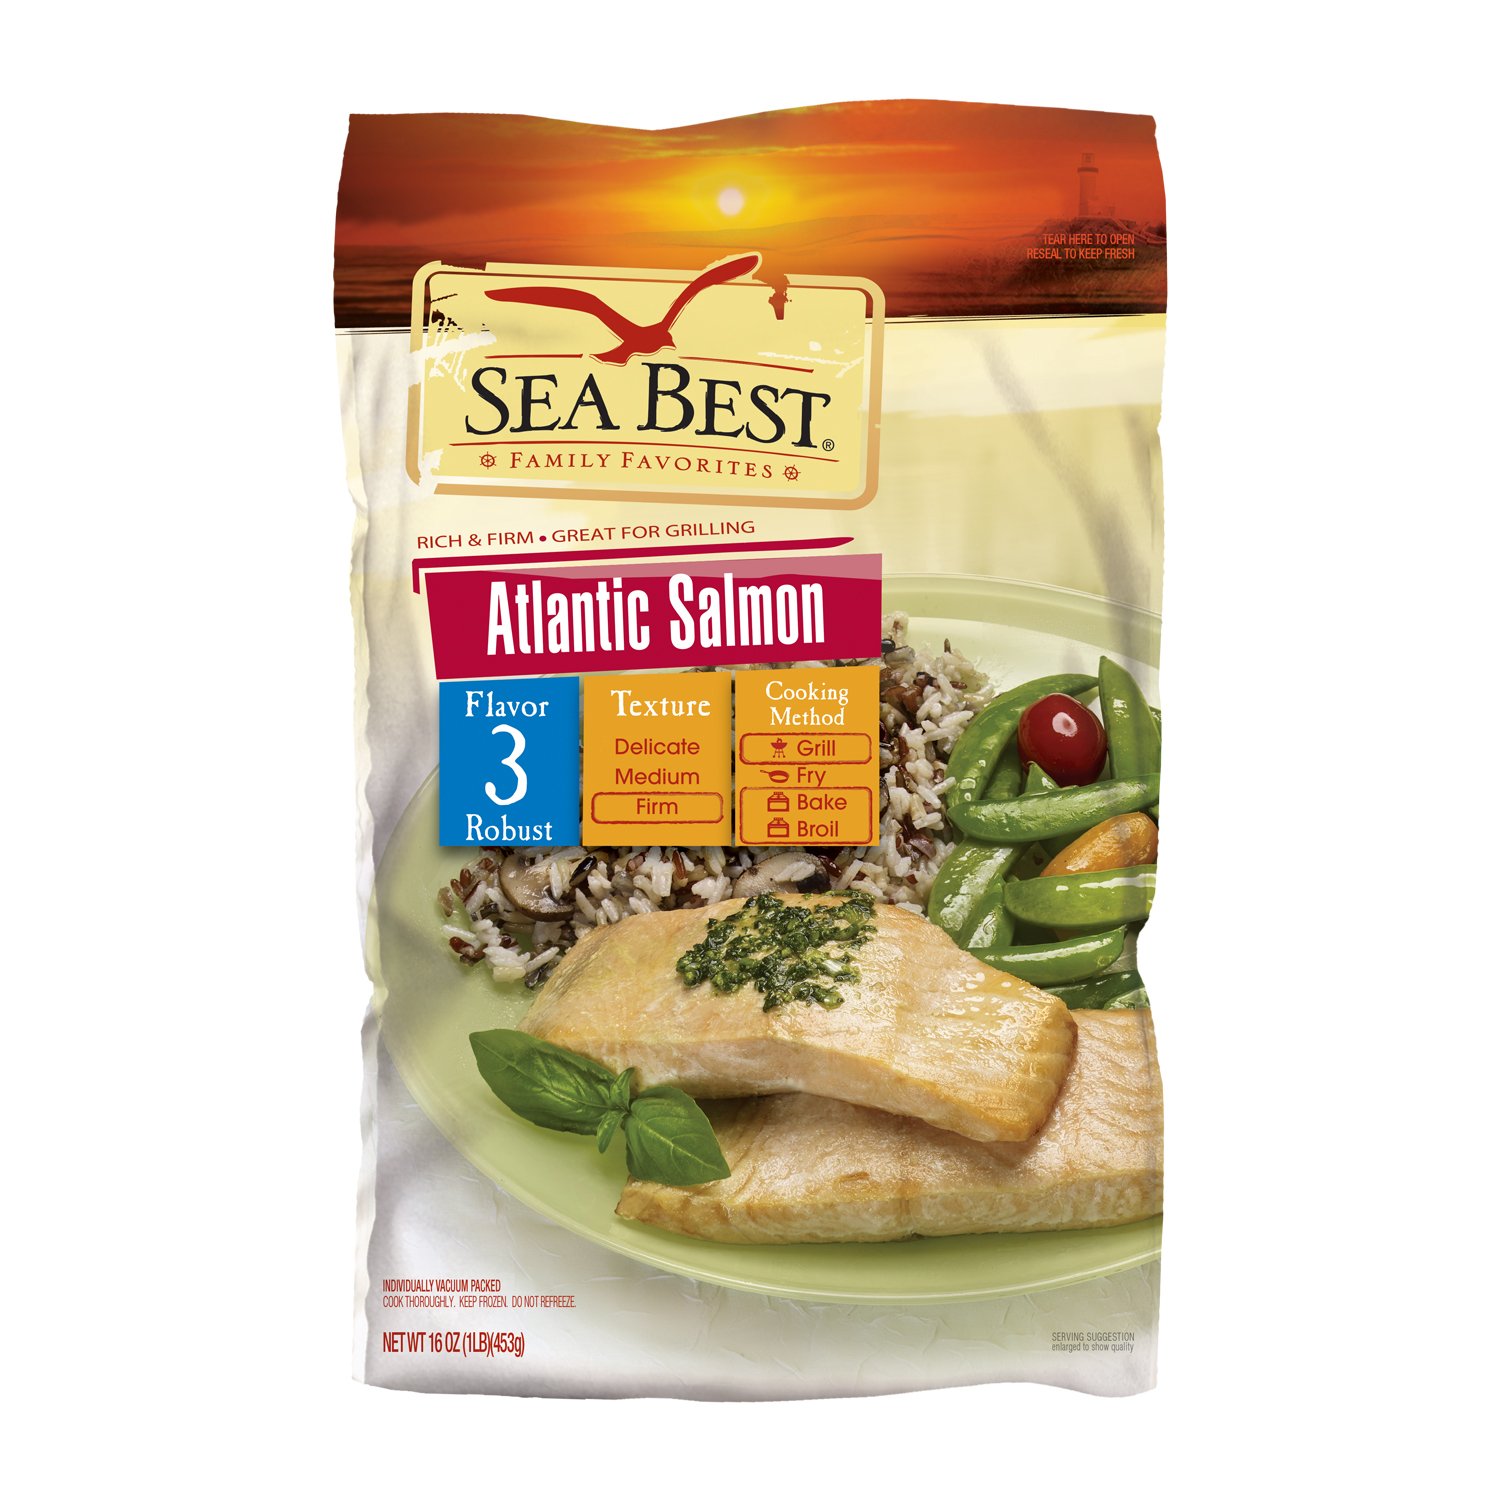 Sea Best All Natural Salmon Portions, 16 Ounce, 40% OFF